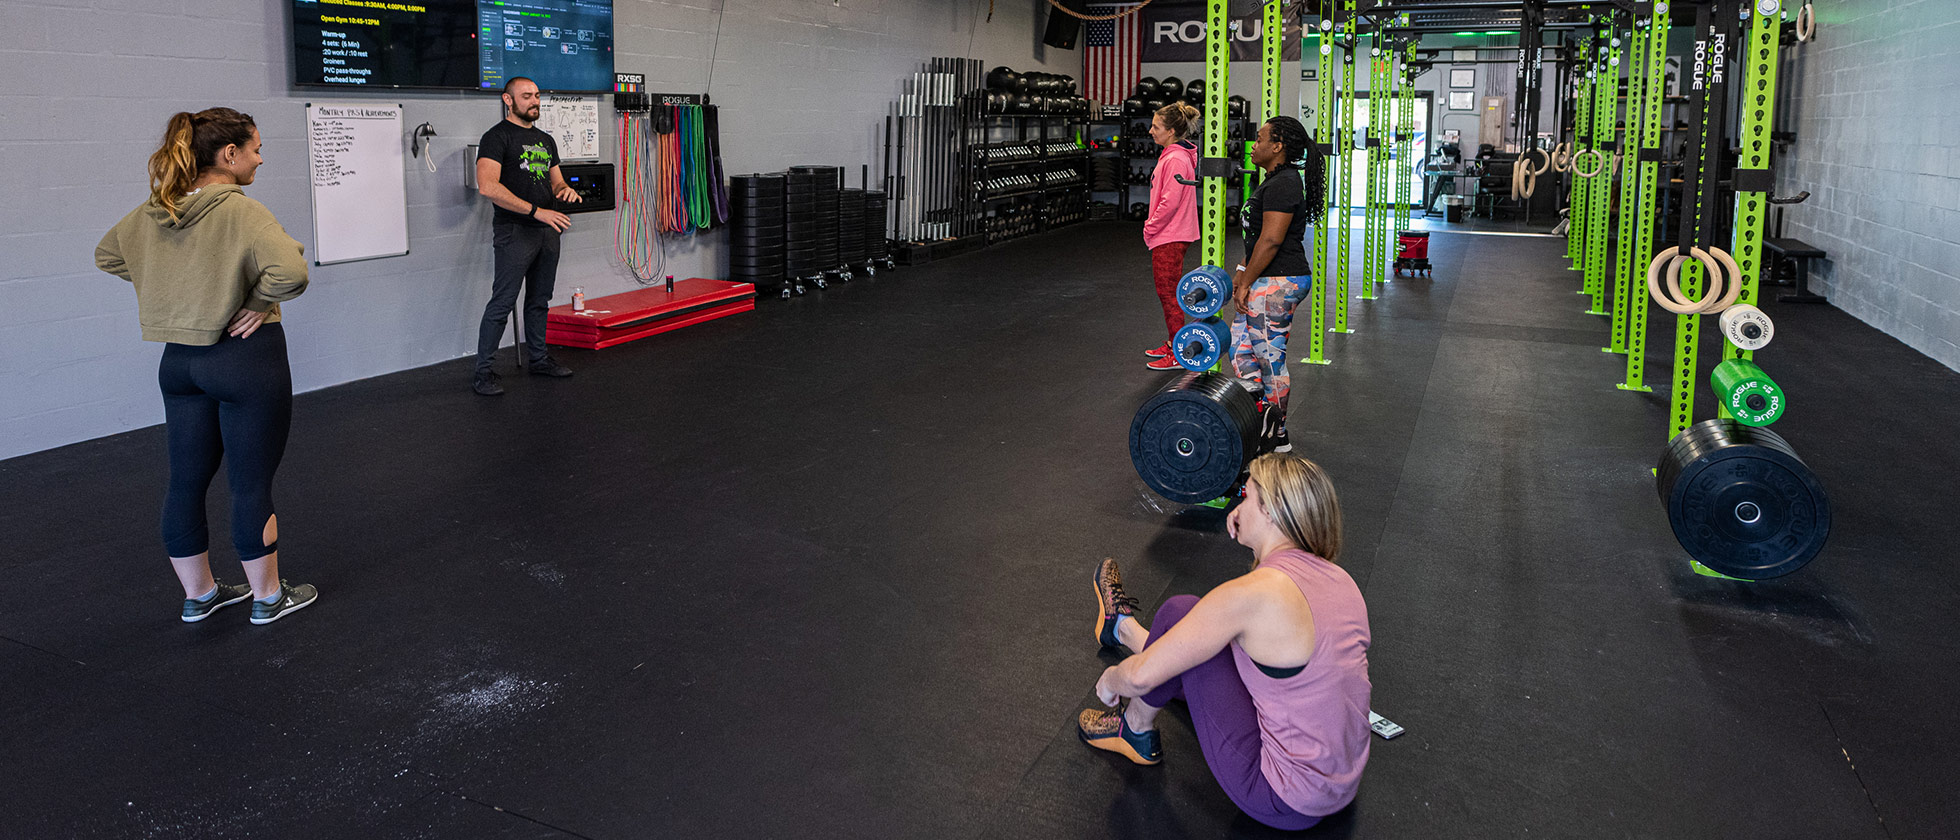 Top 5 Best CrossFit Gyms To Join In Tampa, Florida